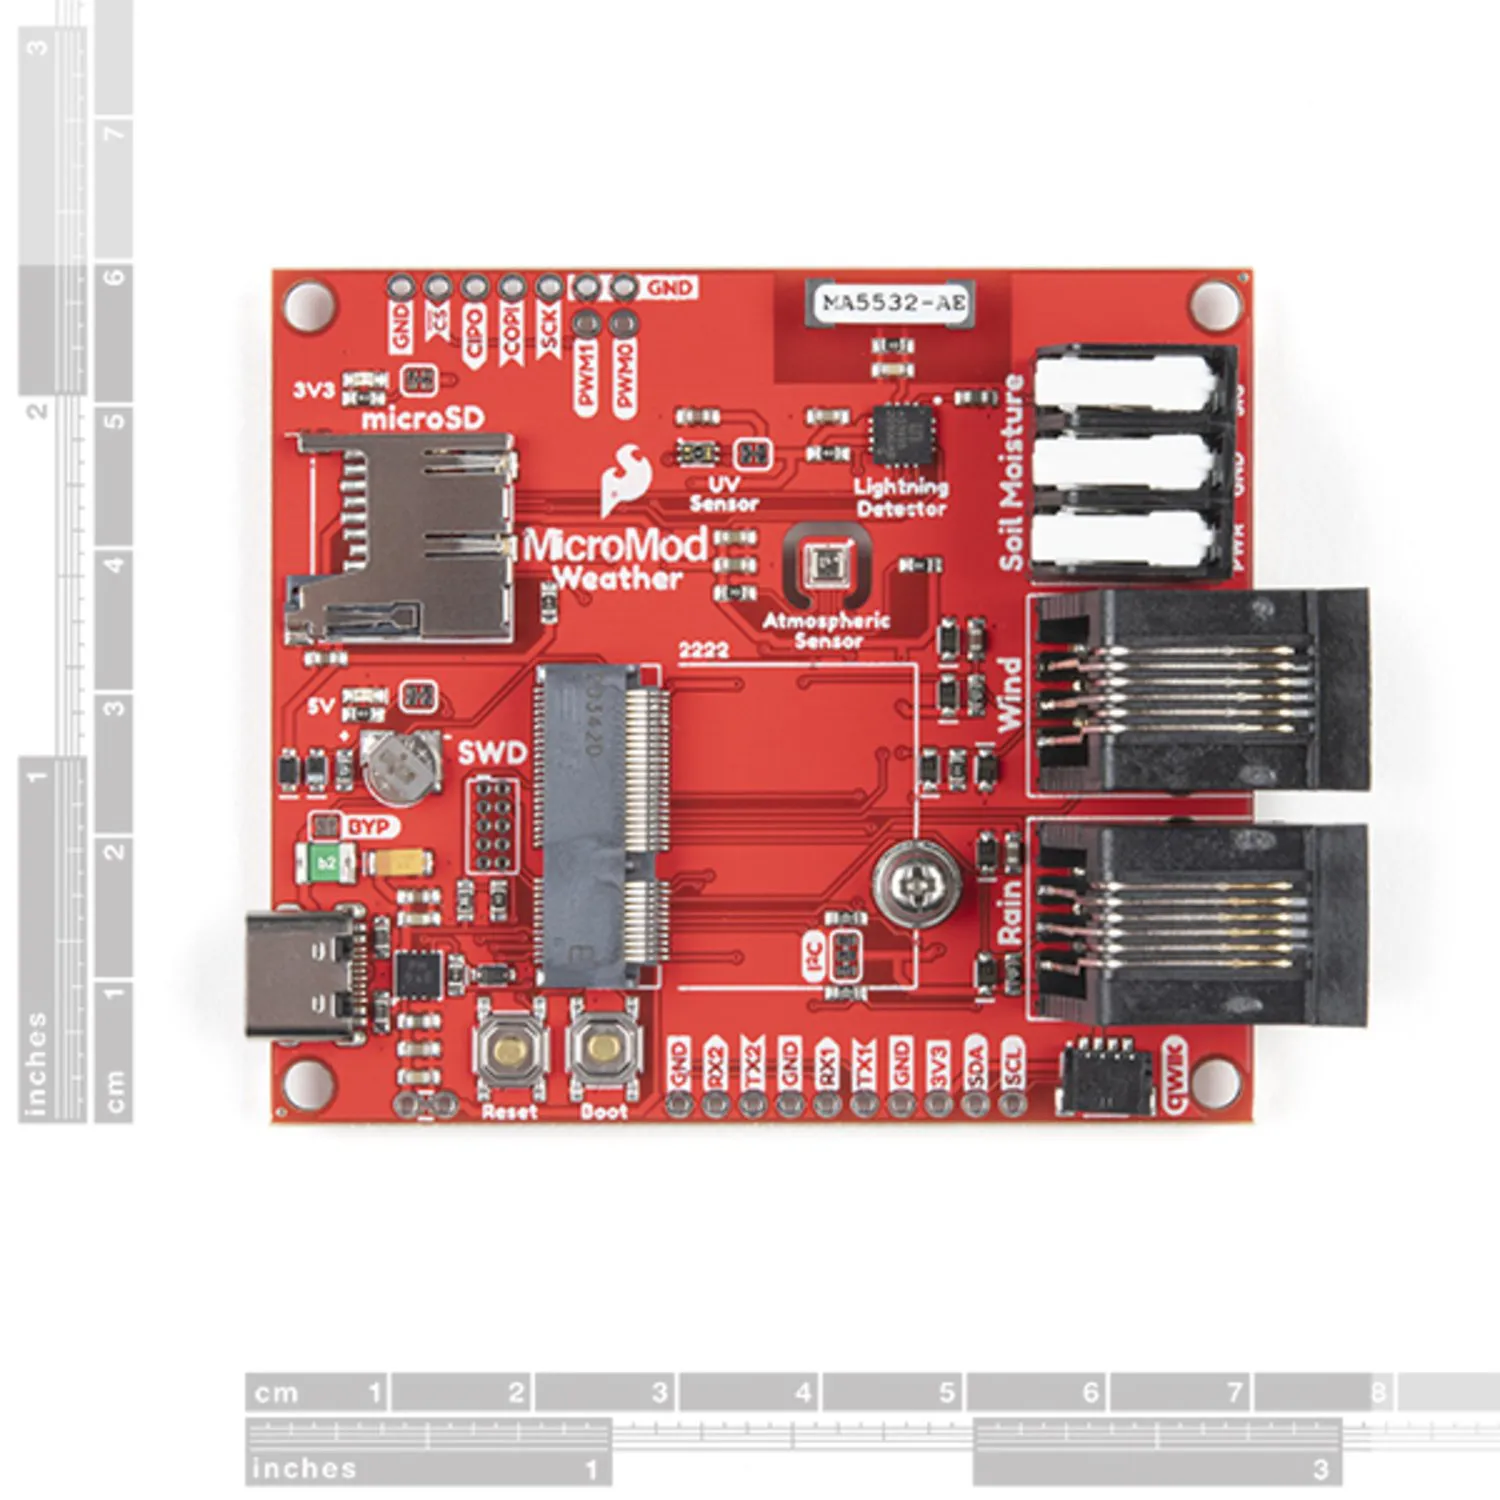 Photo of SparkFun MicroMod Weather Carrier Board